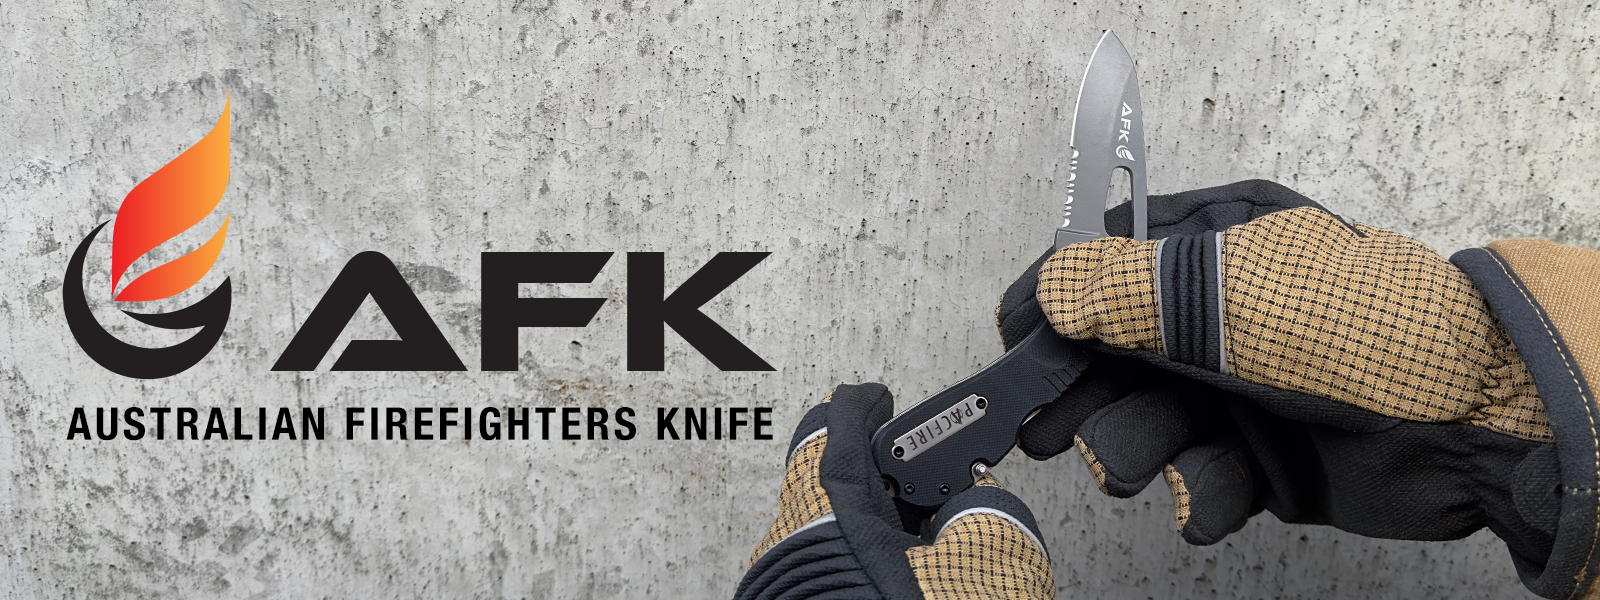 Australian Firefighters Knife Co - Another premium quality Pac Fire brand.